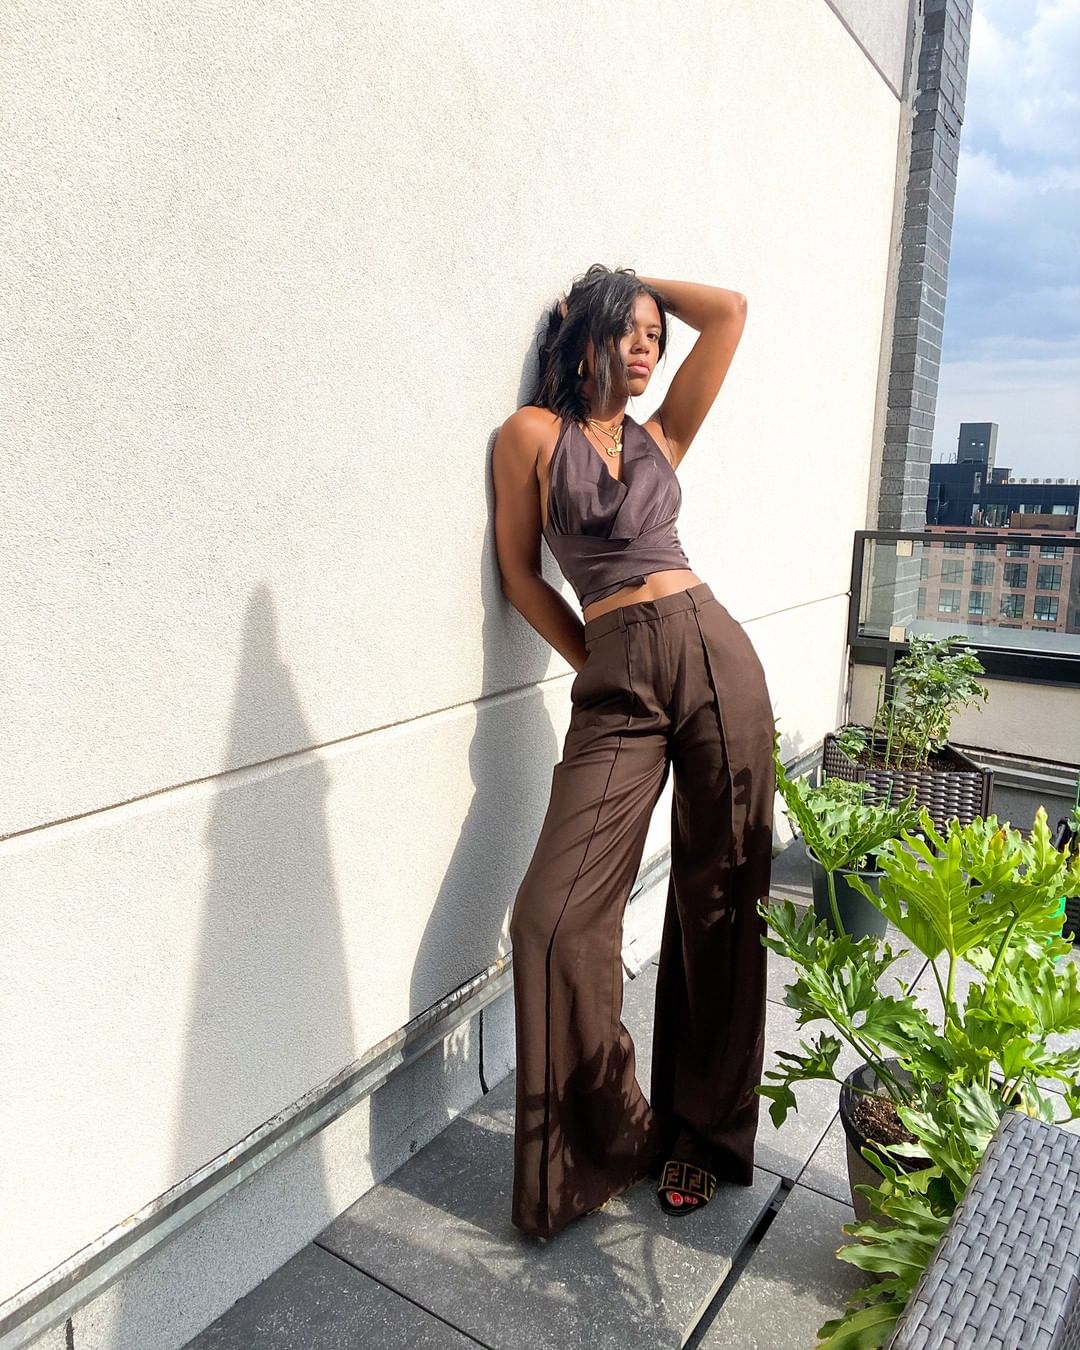 Next Up: 10 Black Creatives To Follow On Instagram For Fun Style Inspiration